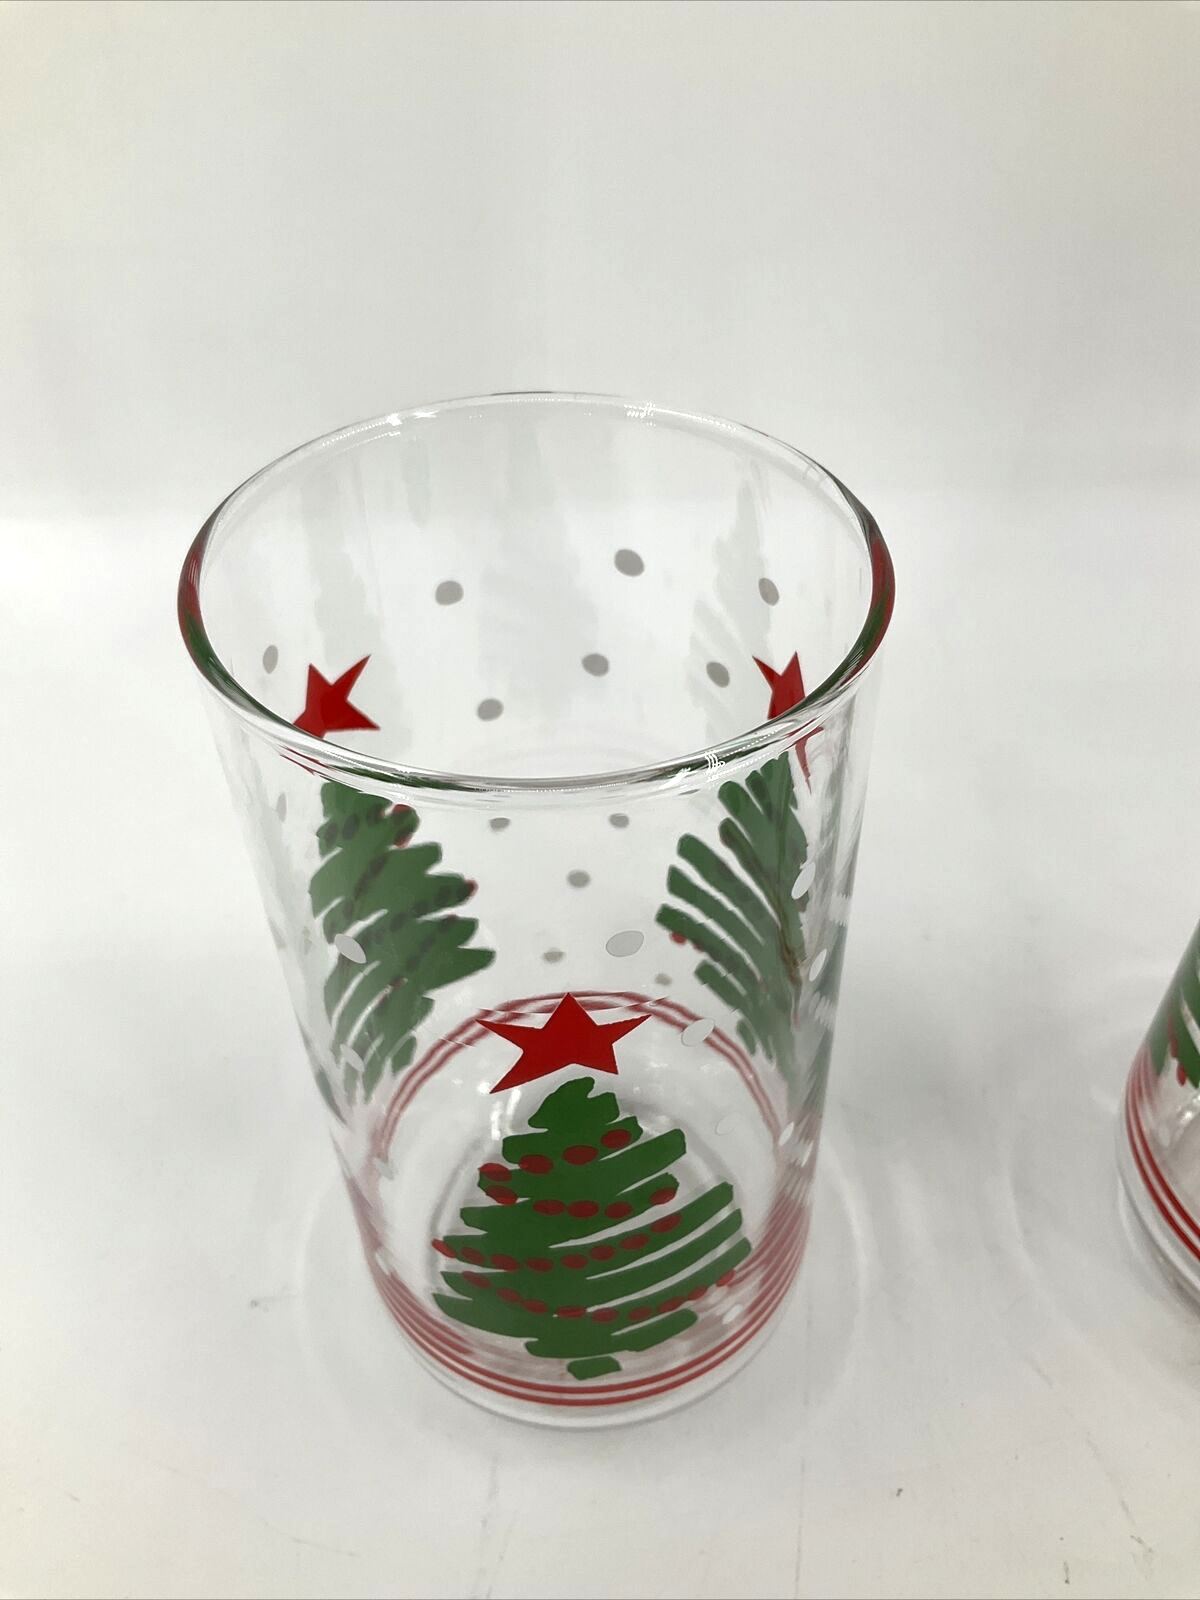 Christmas Friends Frosted Glass Cup Libbey Can Tumbler LIBBEYCHRISTMAS –  Bailey Bunch Designs